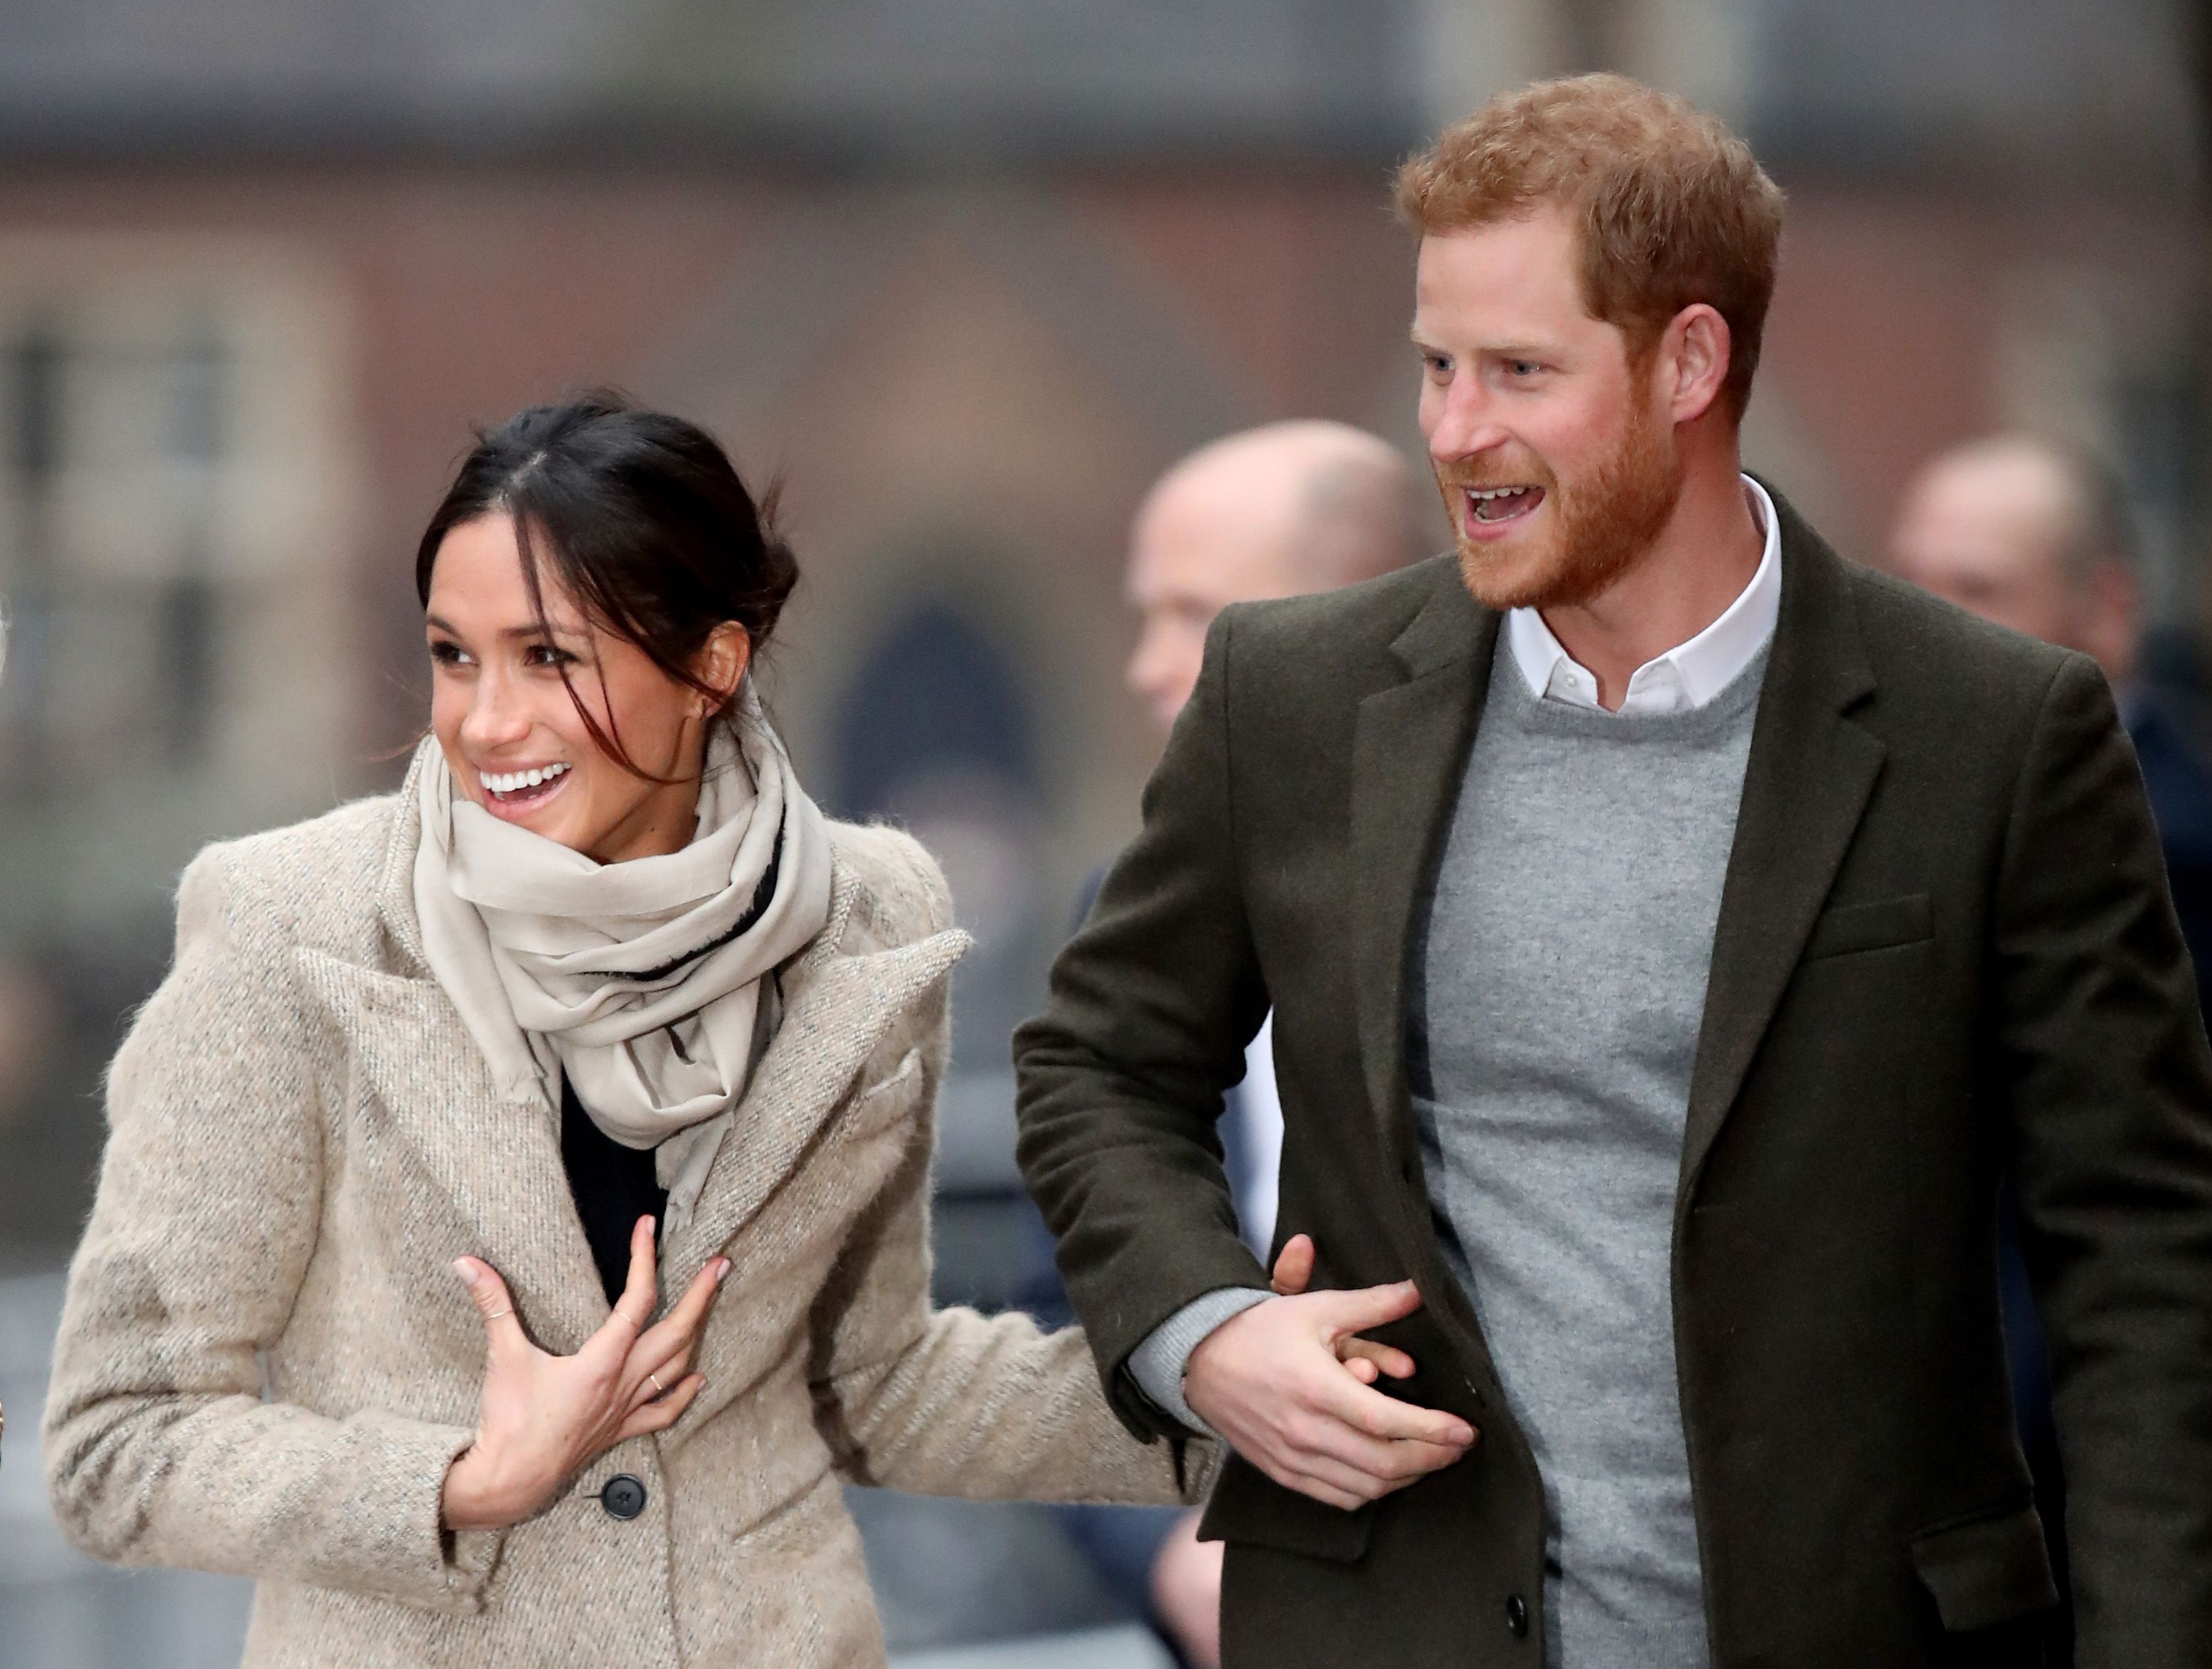 https://hips.hearstapps.com/hmg-prod.s3.amazonaws.com/images/hbz-prince-harry-meghan-markle-cute-moments-gettyimages-902959638-1523378906.jpg?crop=1xw:1xh;center,top